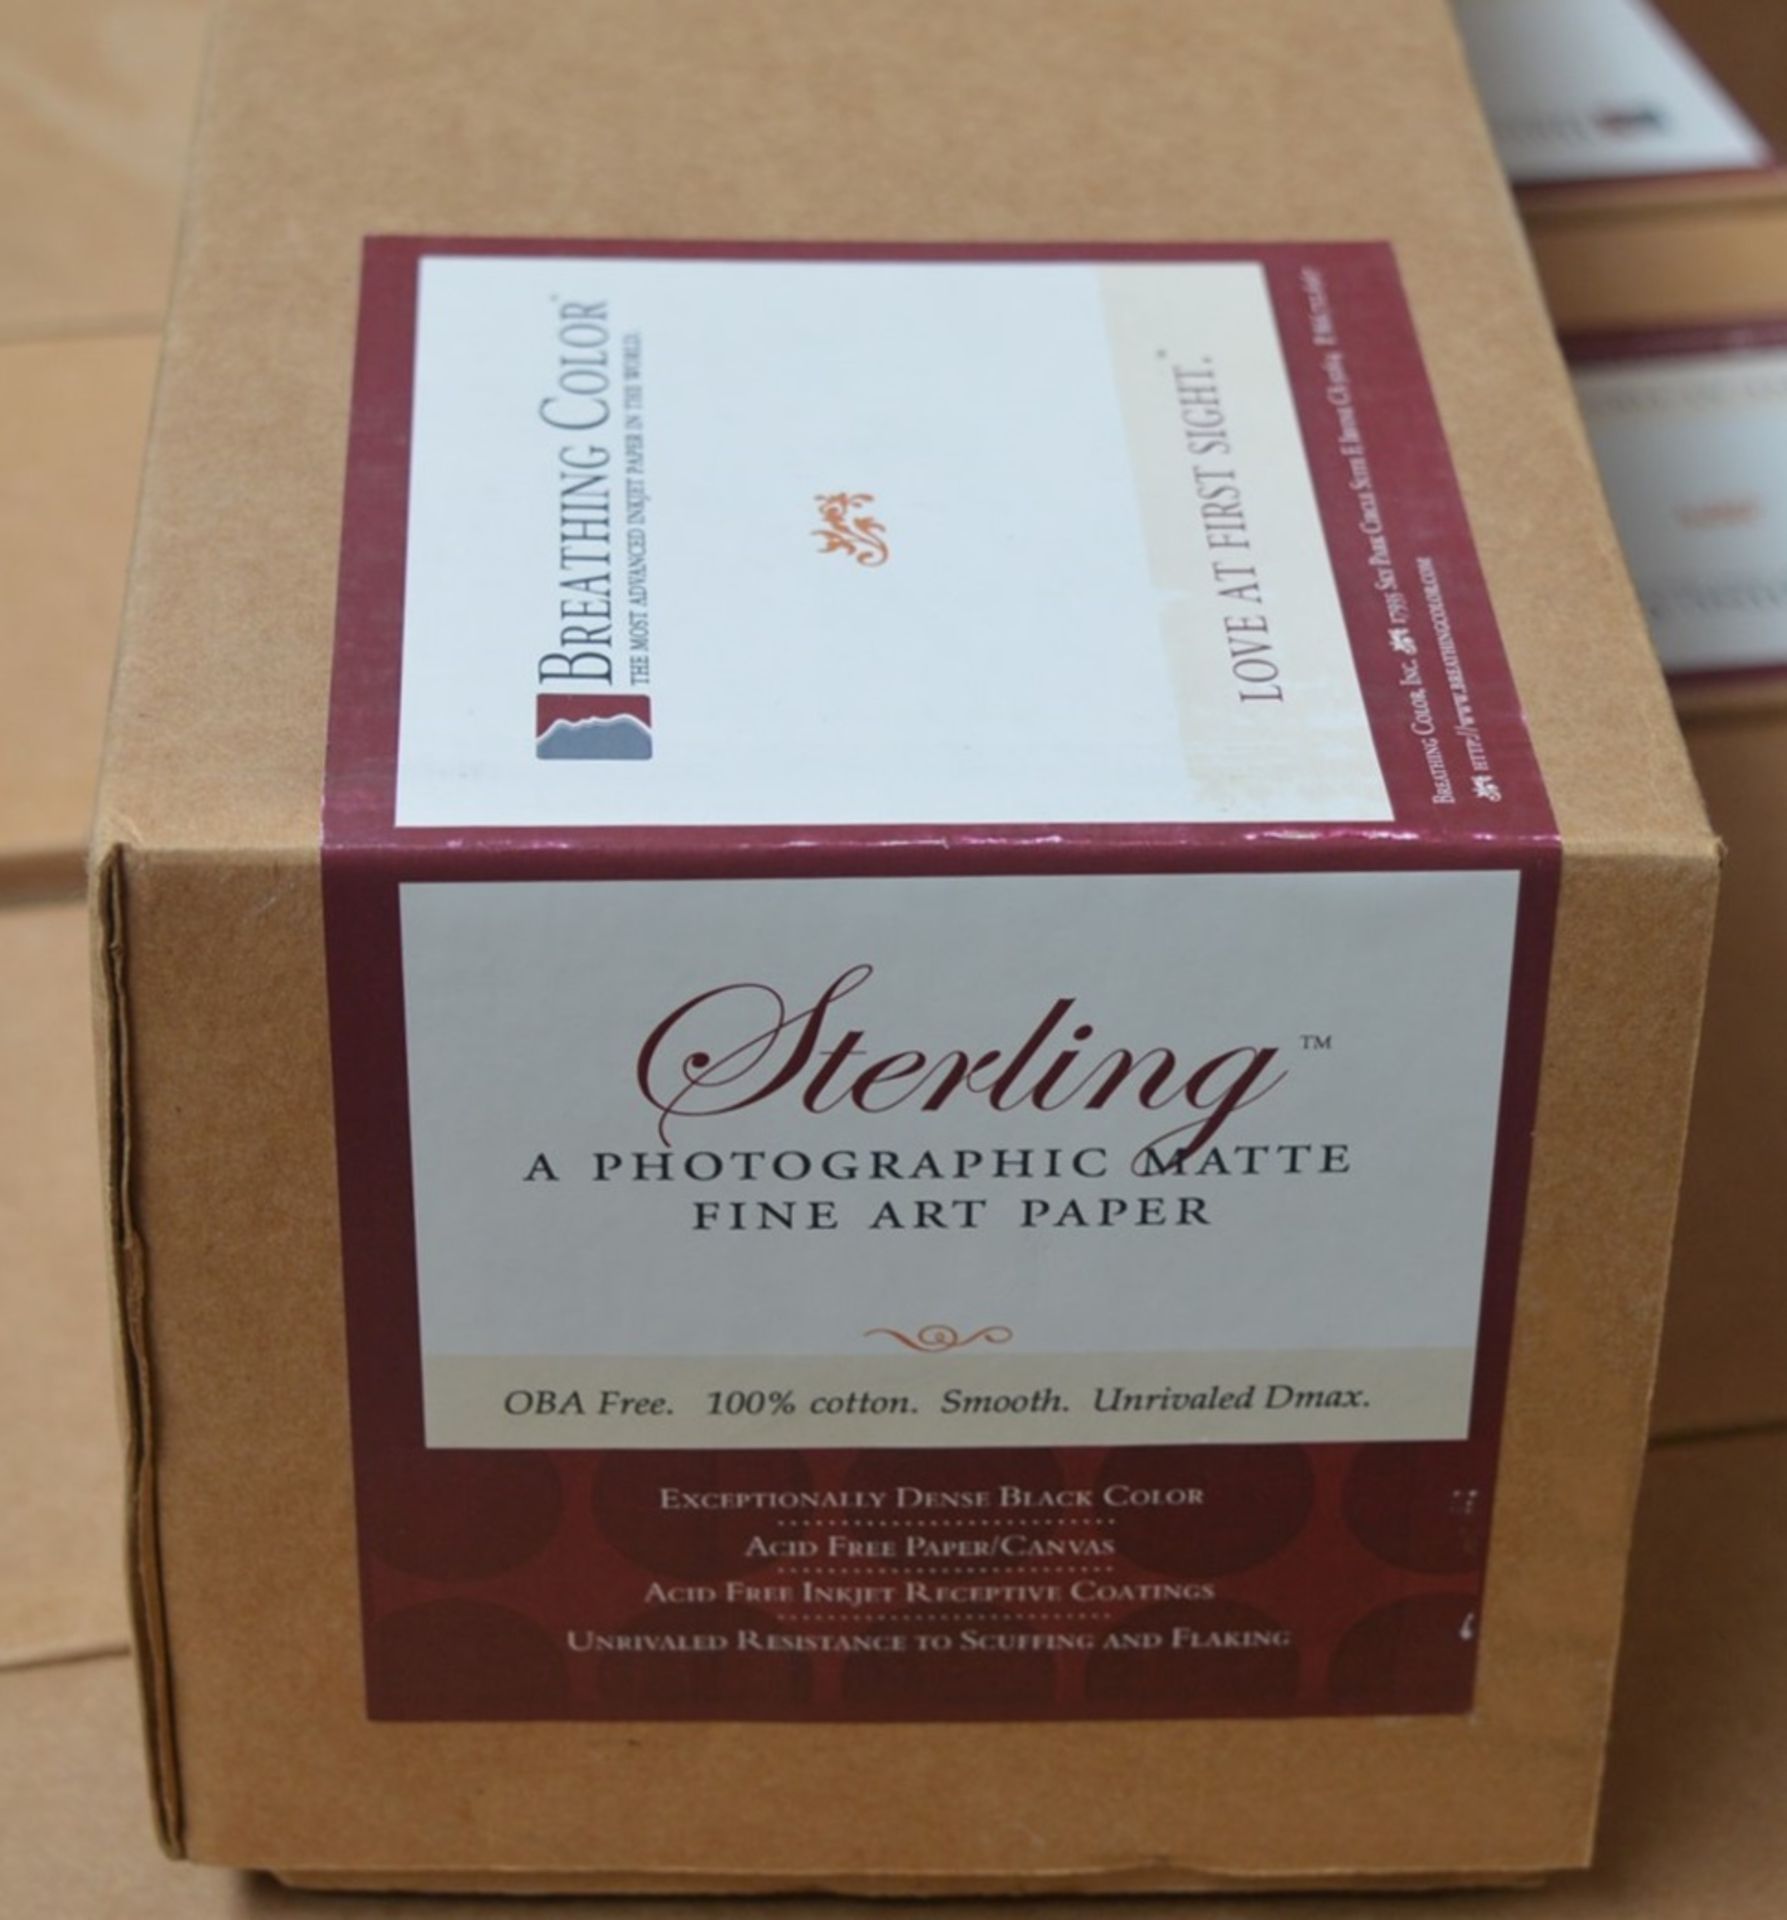 1 x Roll of Breathing Colour STERLING Photographic Matte Fine Art Paper - Size 17" x 50' - 250gsm - - Image 5 of 5